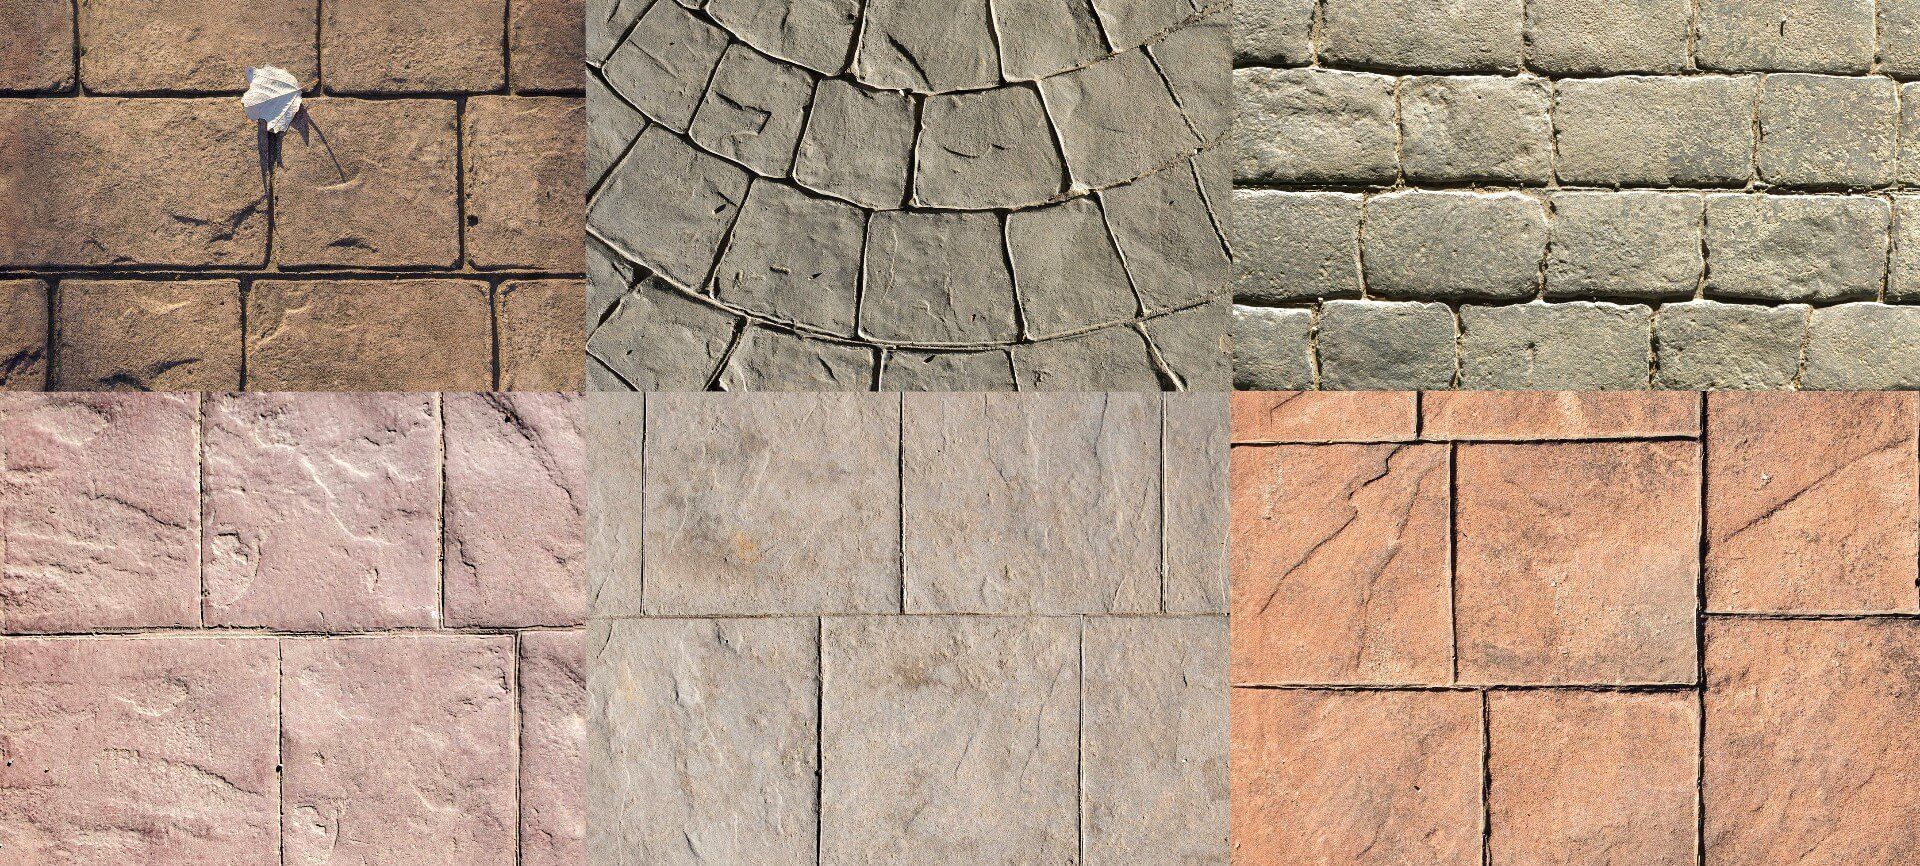 Different patterns you can choose from for your stamped concrete